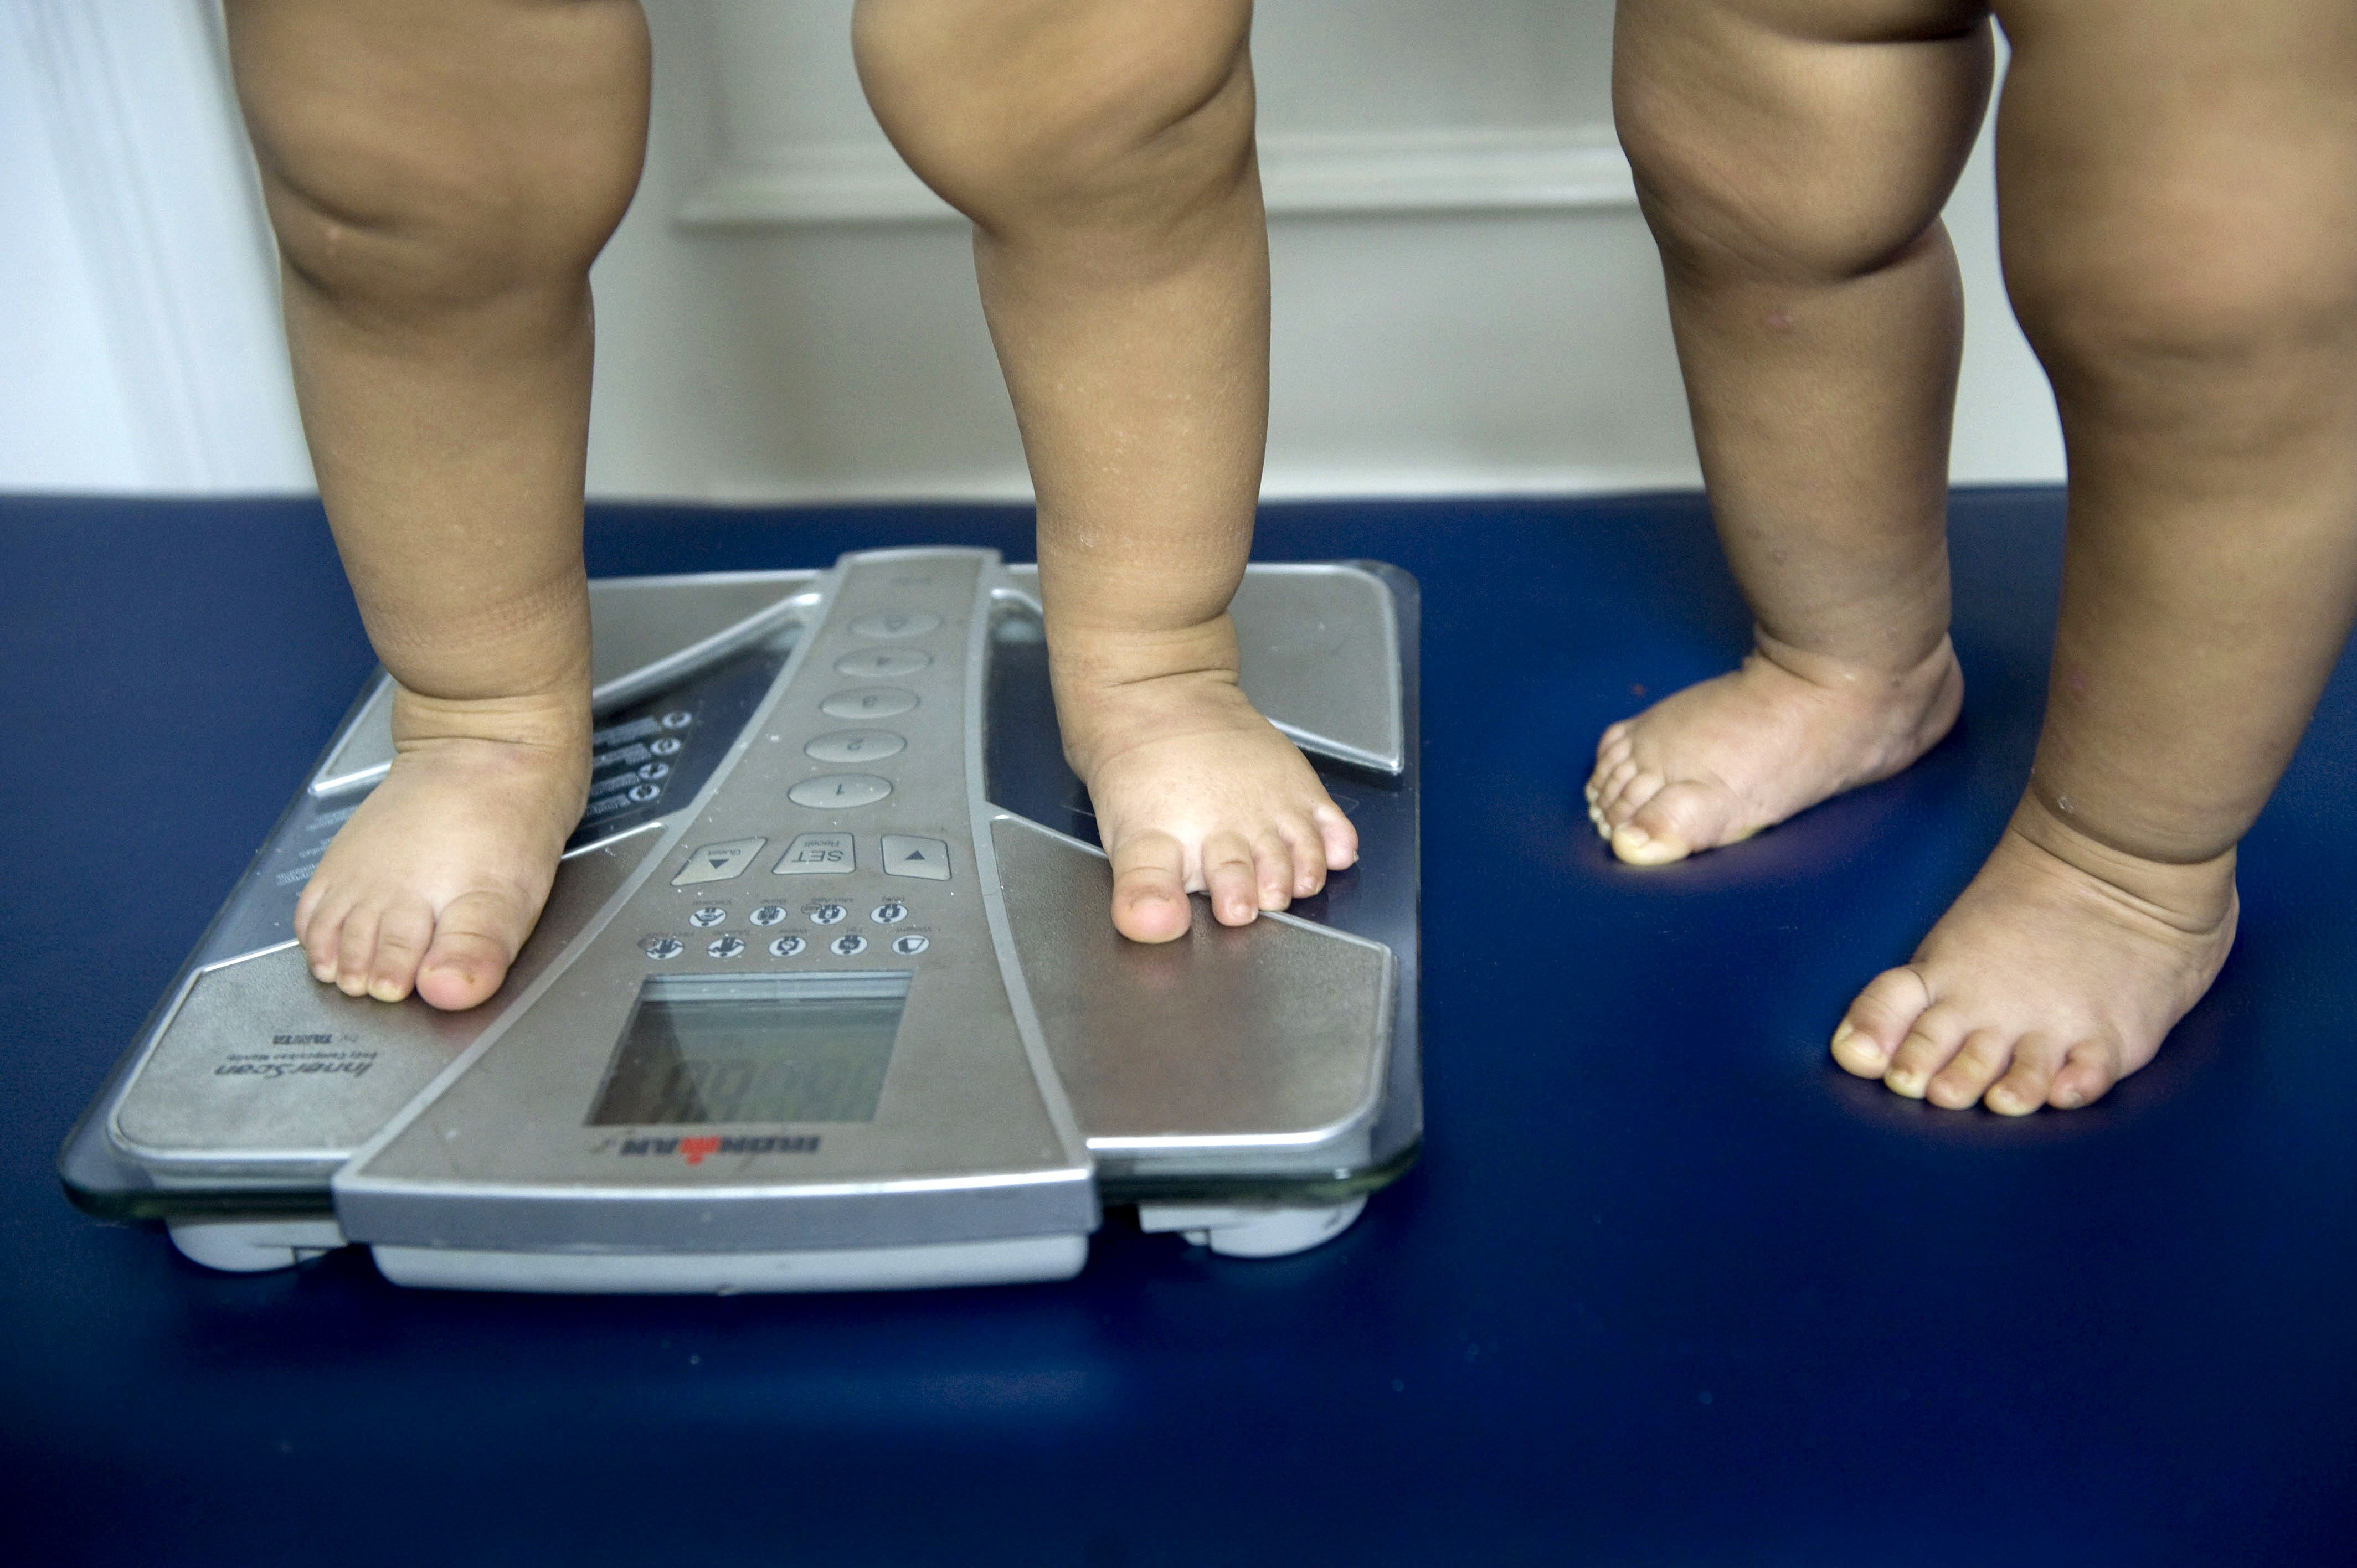 Child and teen obesity soars tenfold worldwide in 40 years